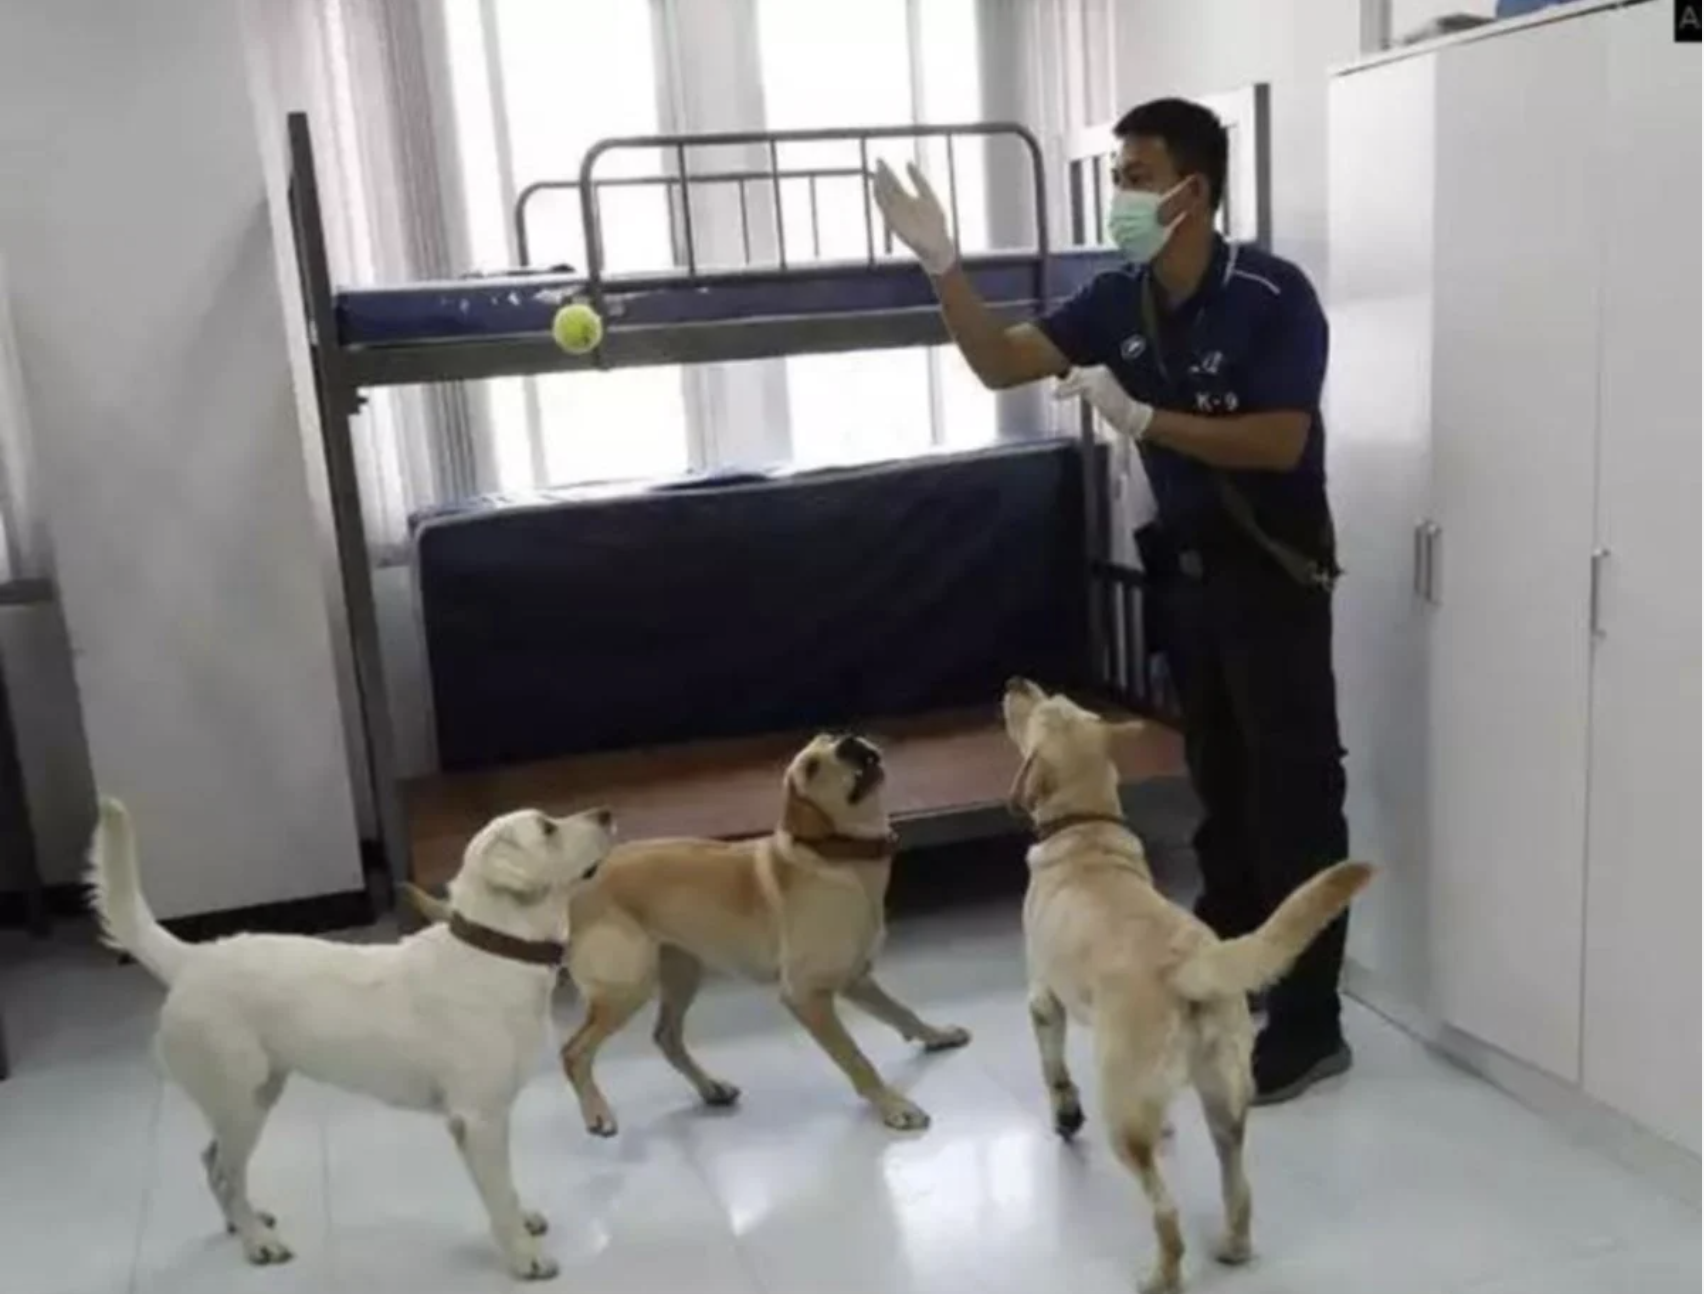 These dogs can detect covid-19 with their noses with a 95% accuracy rate